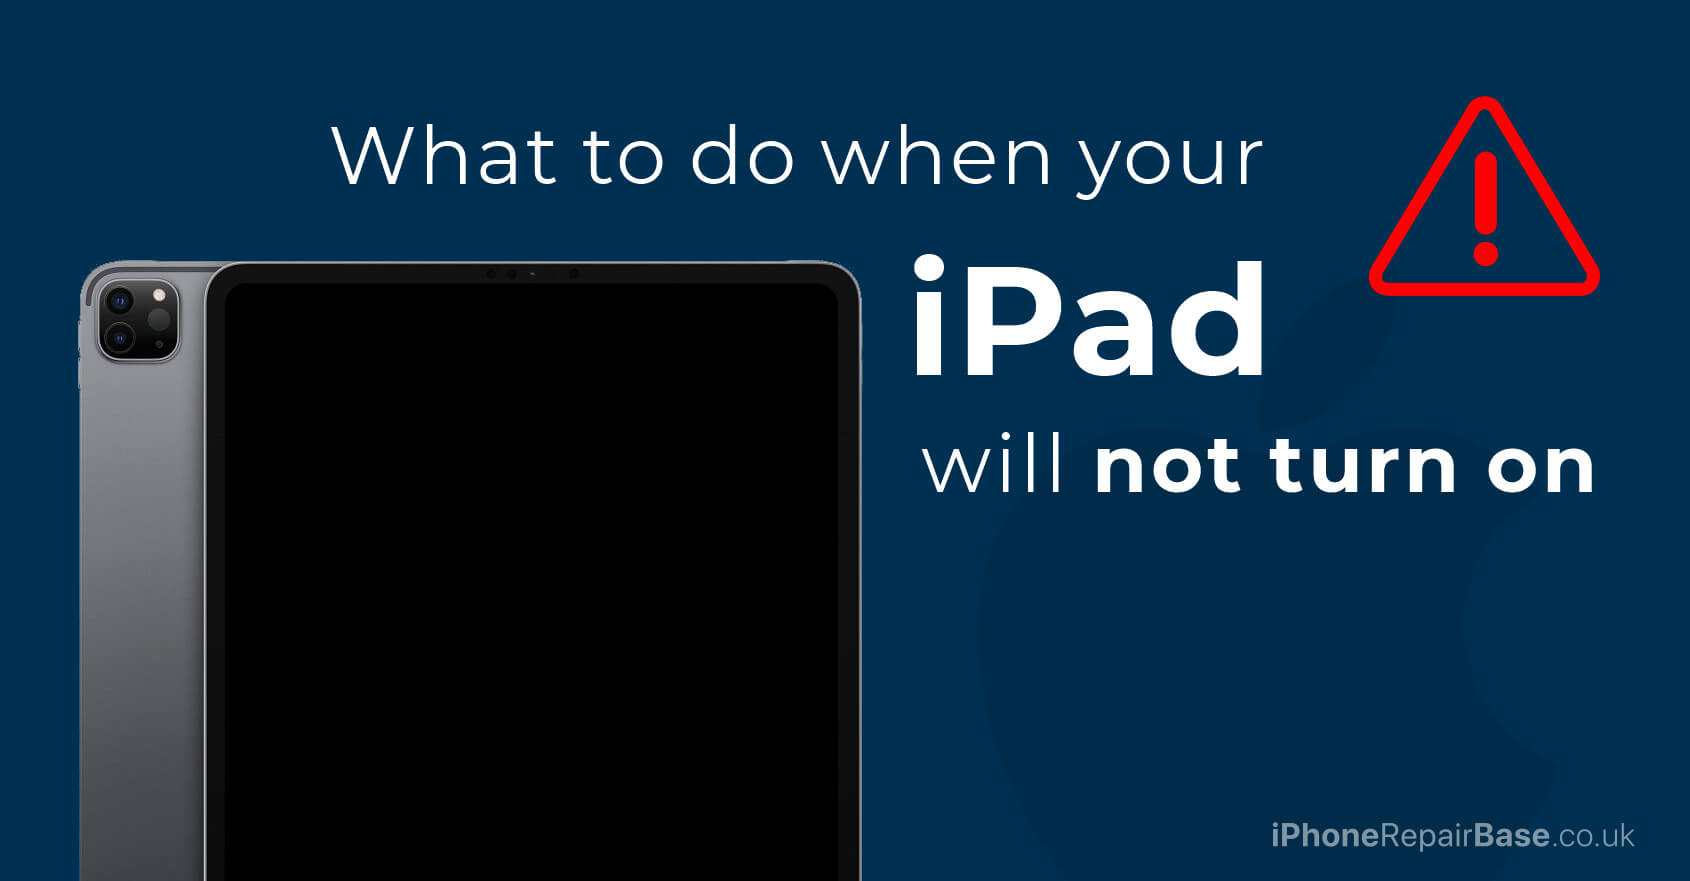 iPad will not turn on features image